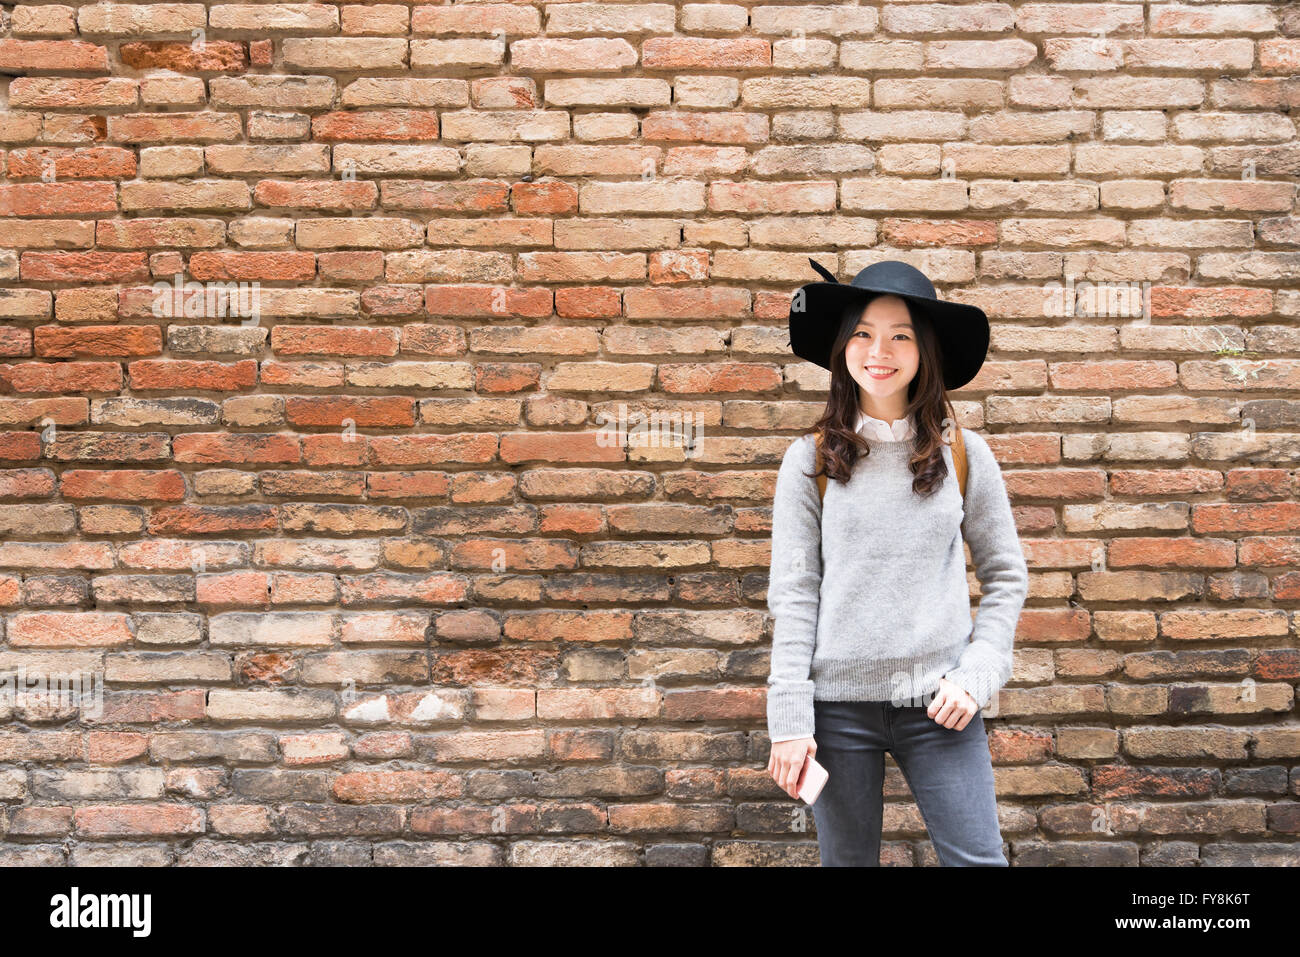 Beautiful asian girl in fashionable dress, standing in front of red brick wall background with copy space Stock Photo